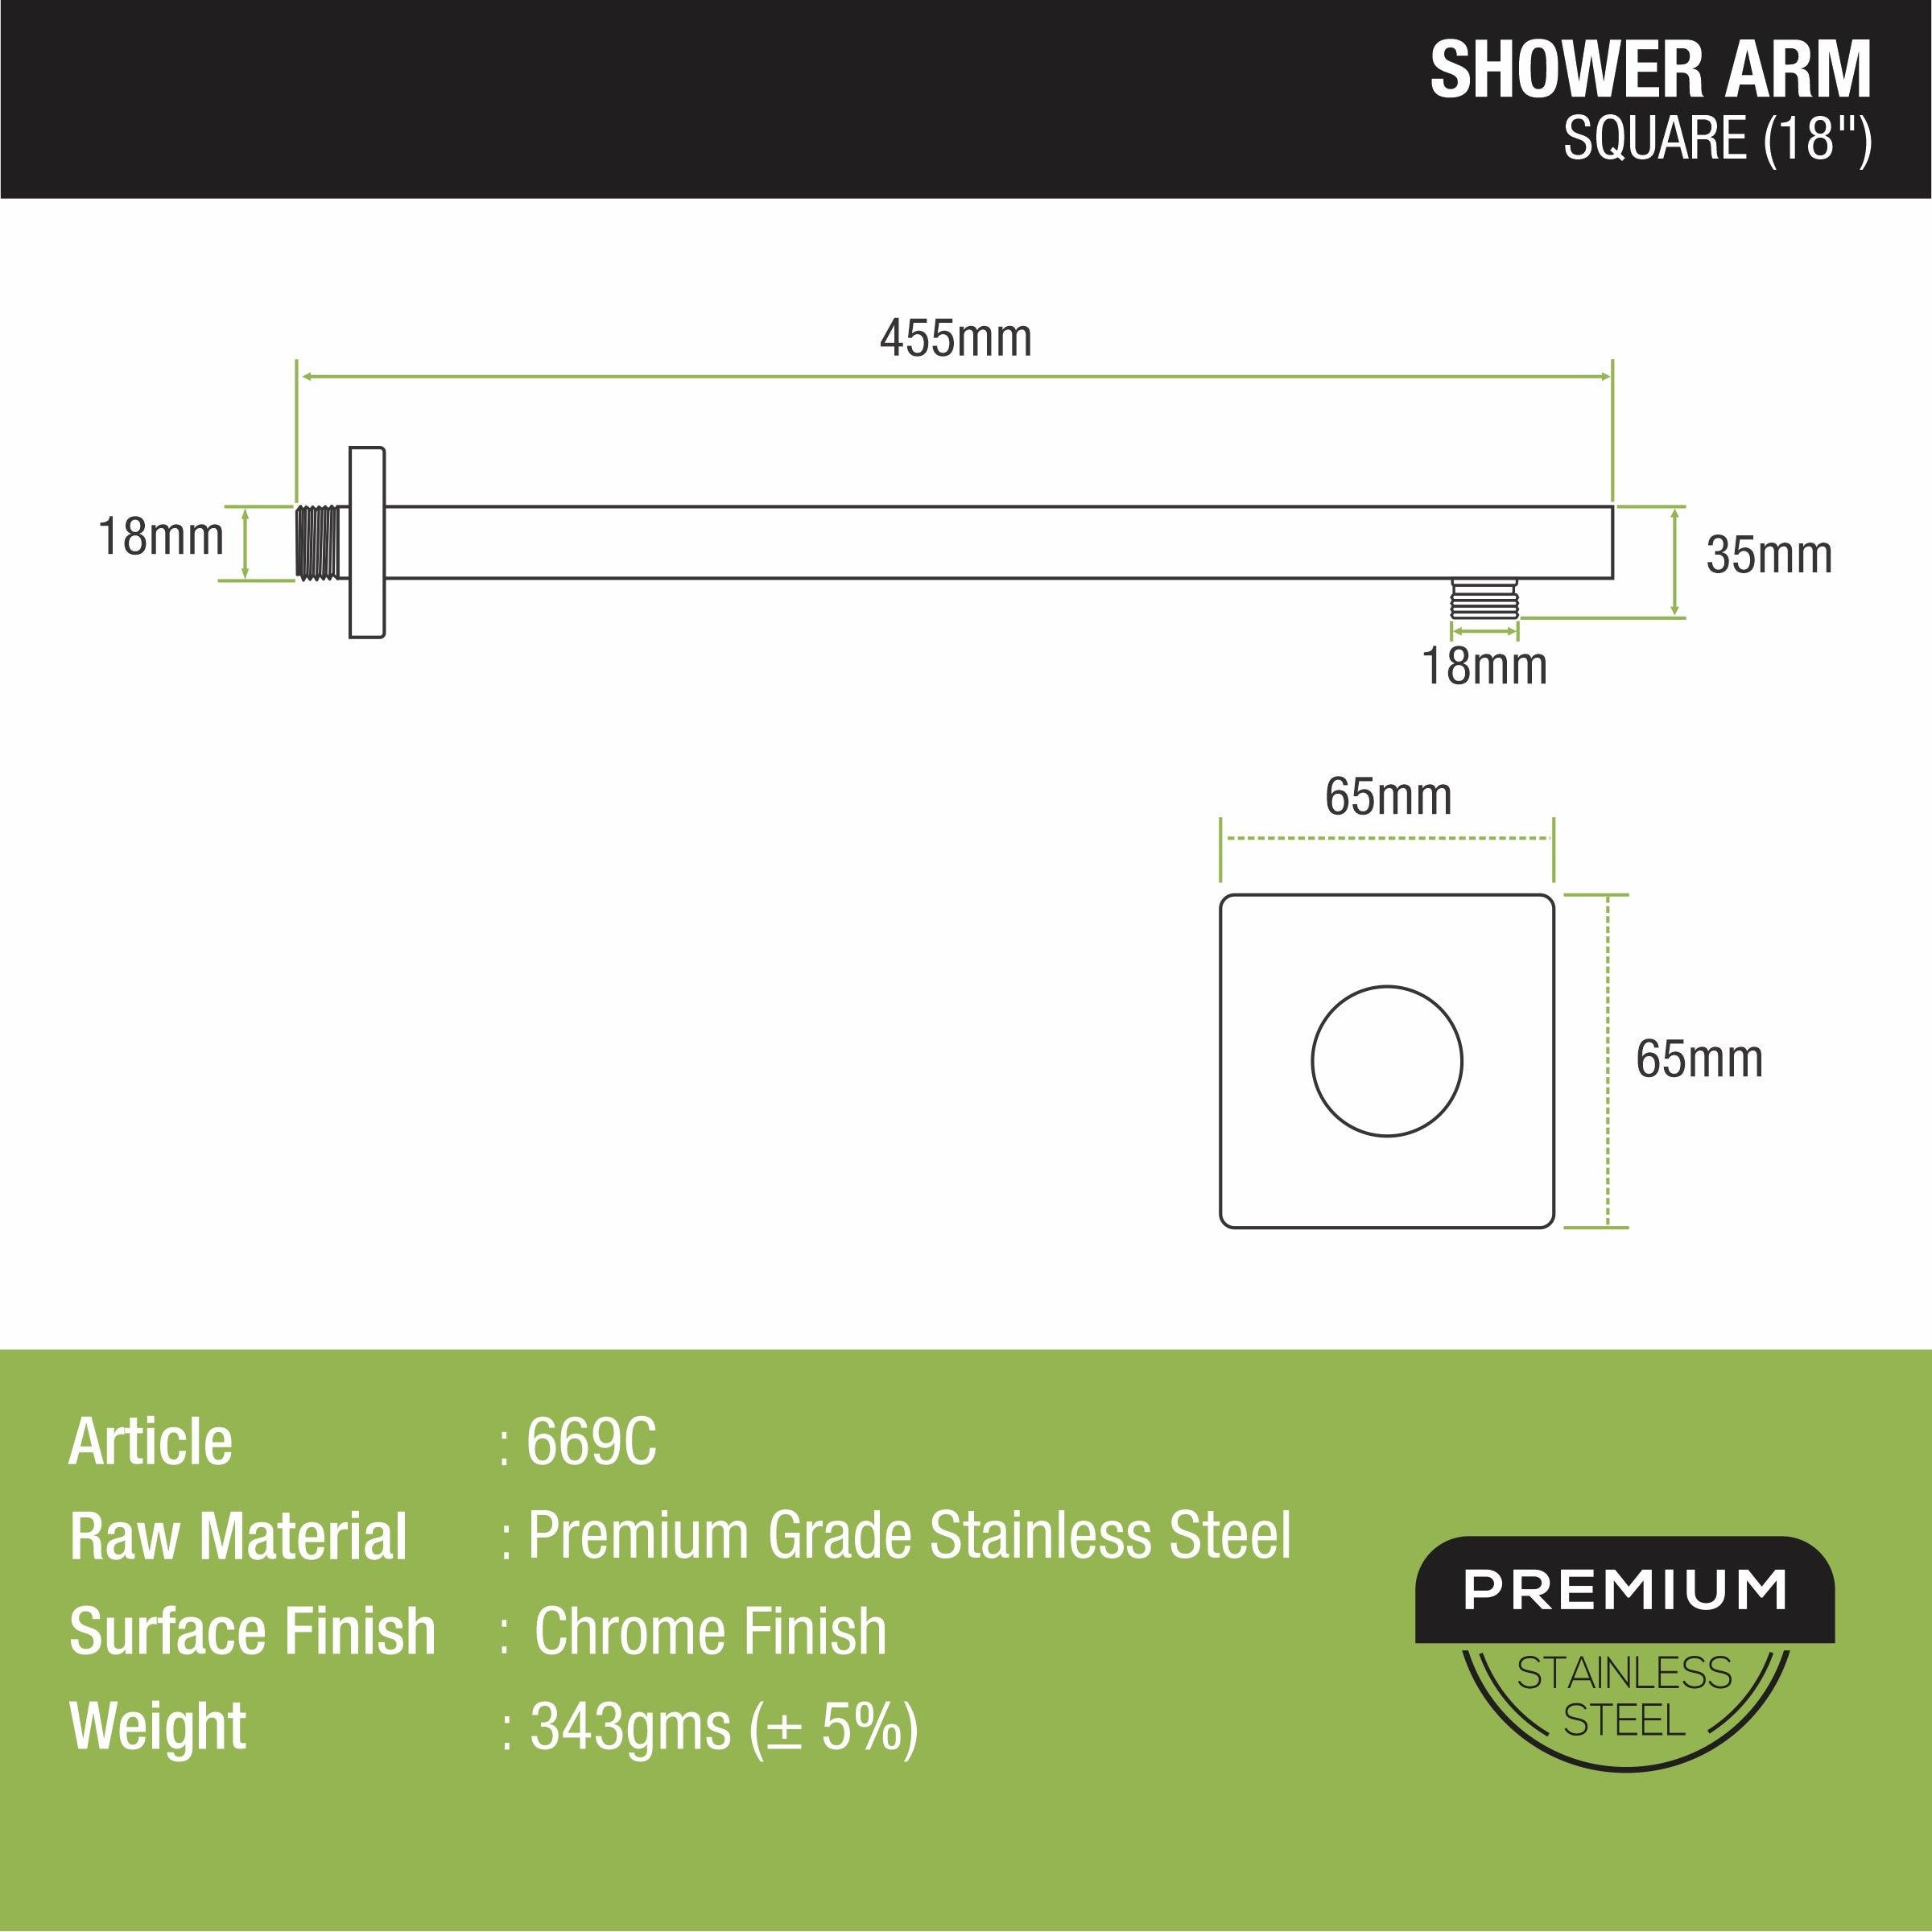 Square Shower Arm (18 Inches) sizes and dimension